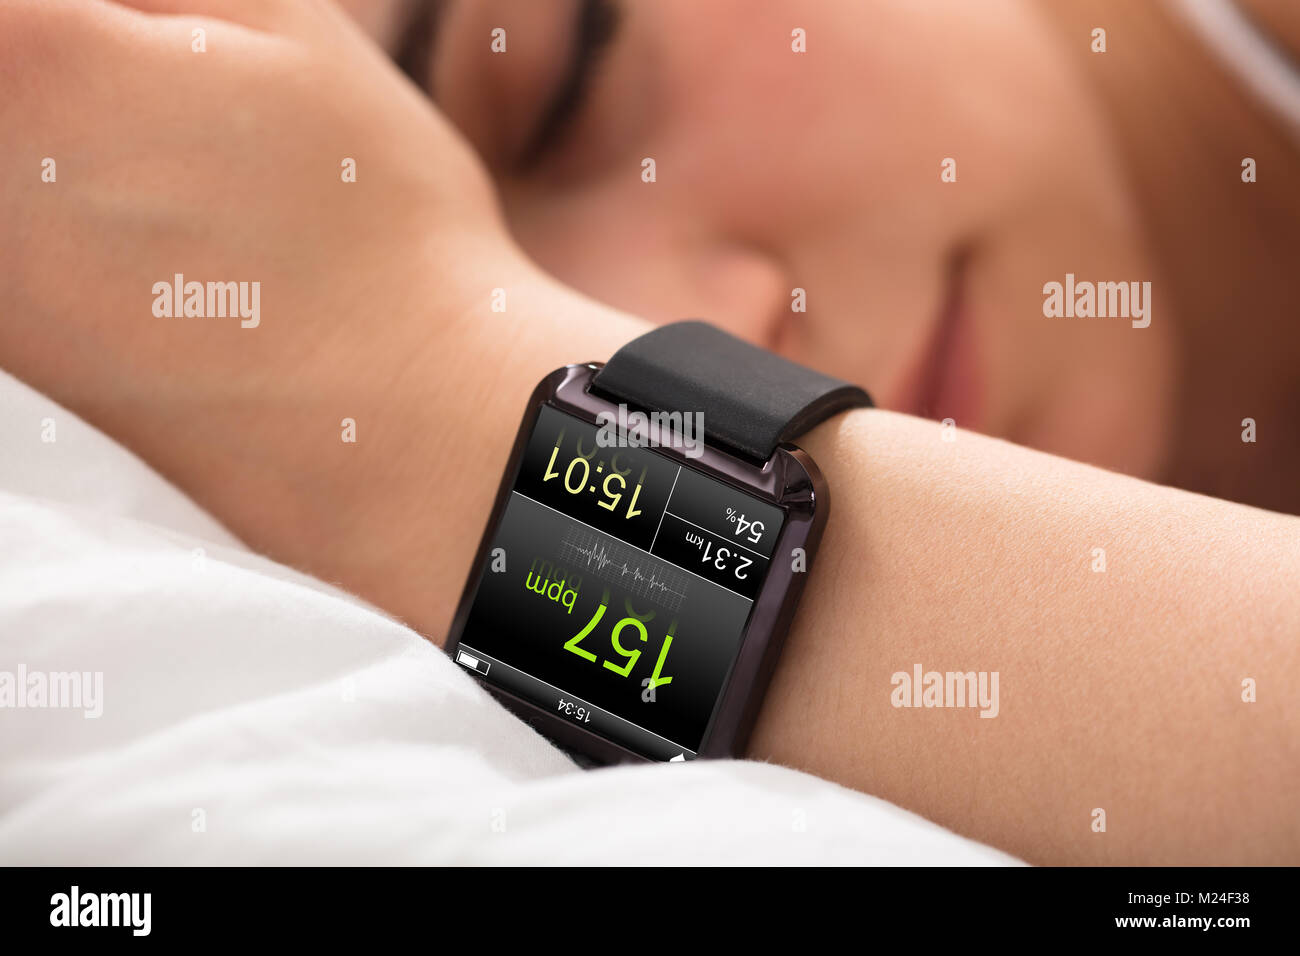 Smart Watch Showing Heartbeat Rate On Sleeping Woman's Hand Stock Photo